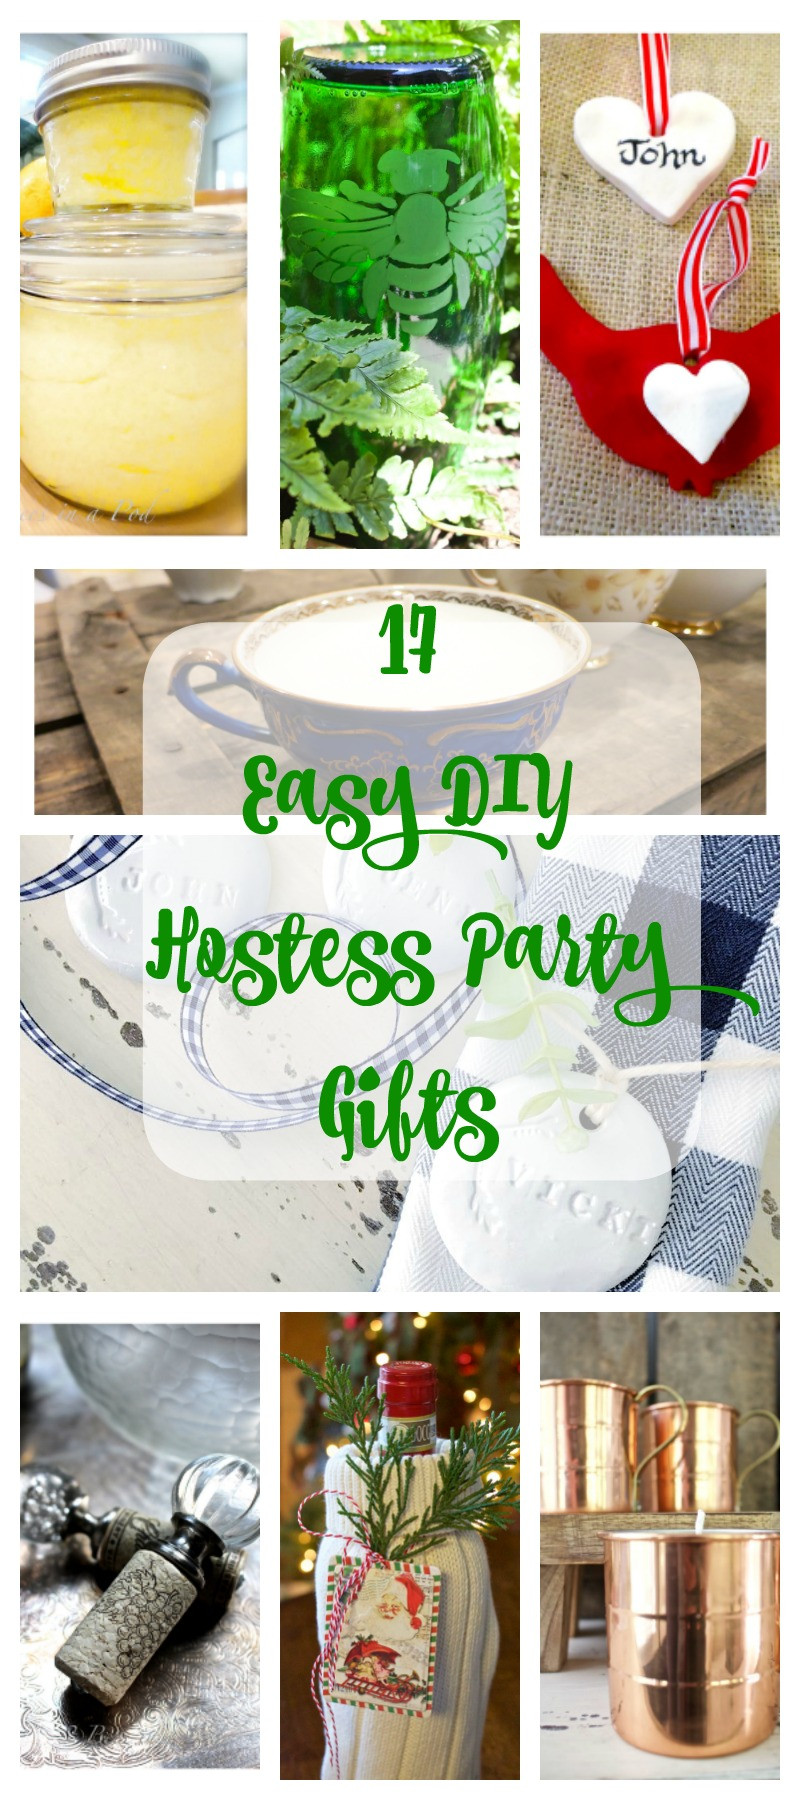 Pinterest Holiday Gift Ideas
 17 Ideas for Easy DIY Holiday Hostess Gifts 2 Bees in a Pod